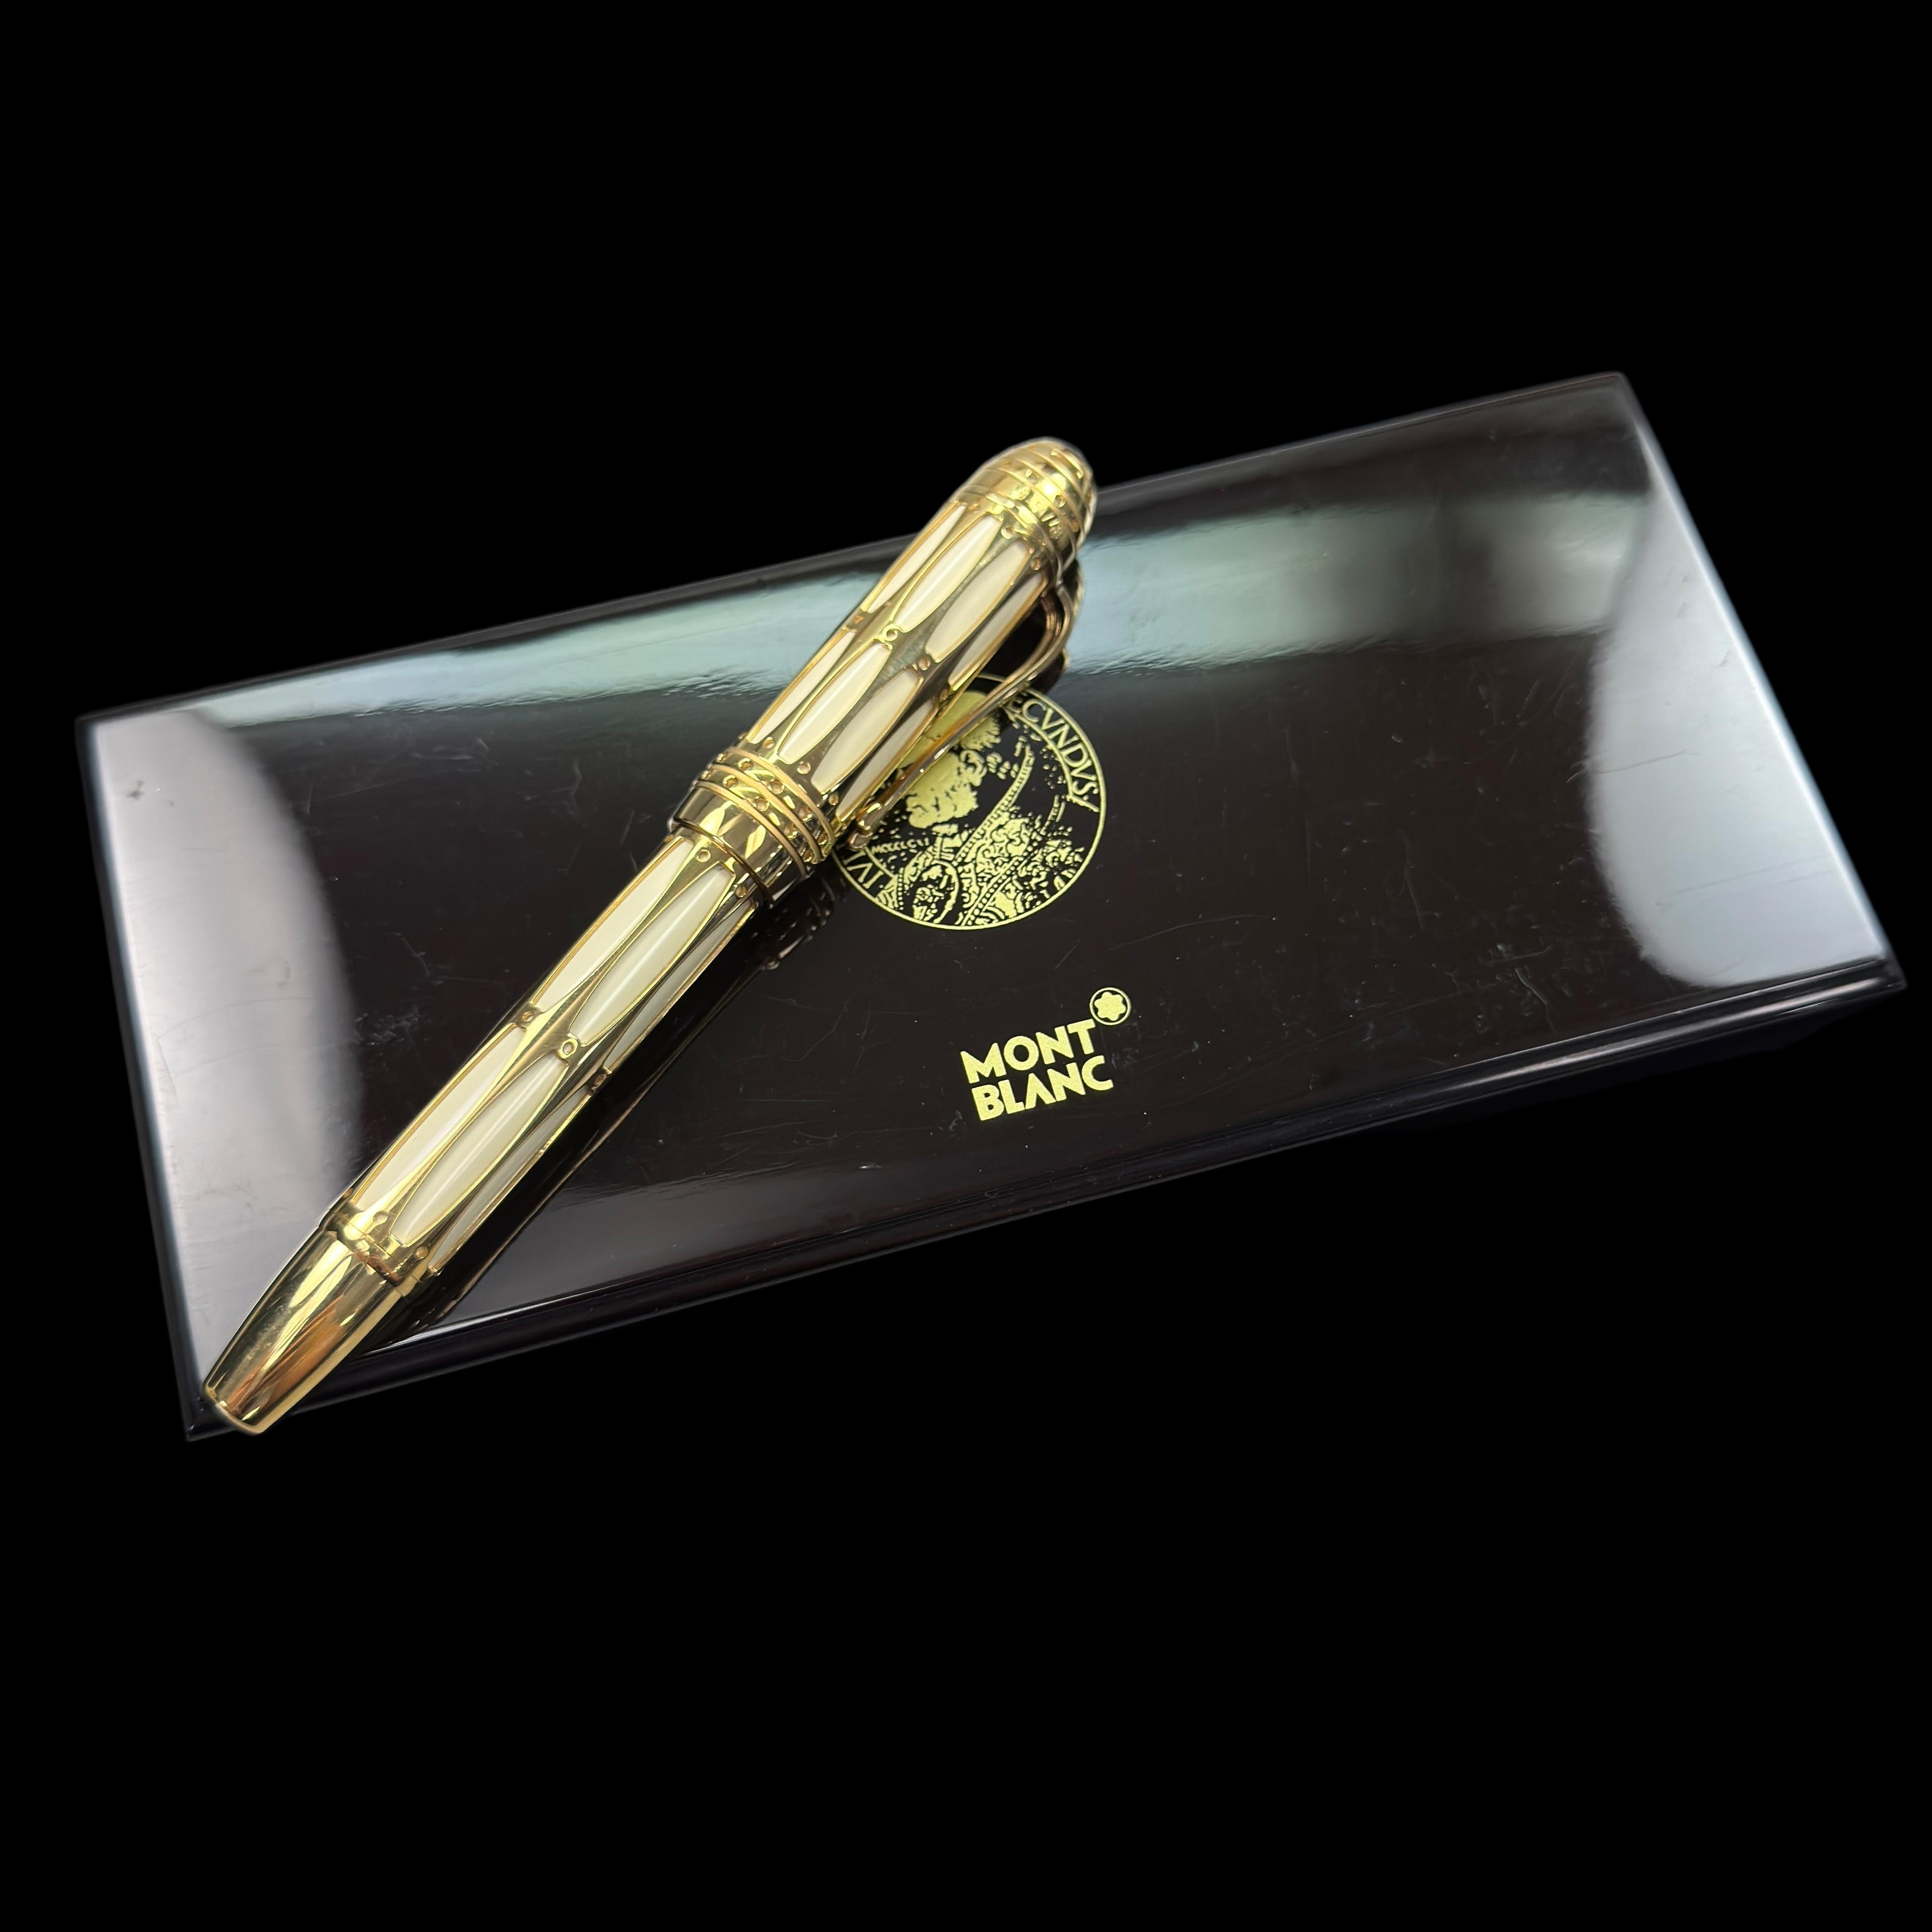 Authentic estate 2005 Montblanc Pope Julius II 0451/4810 Limited Edition gold-plated fountain pen